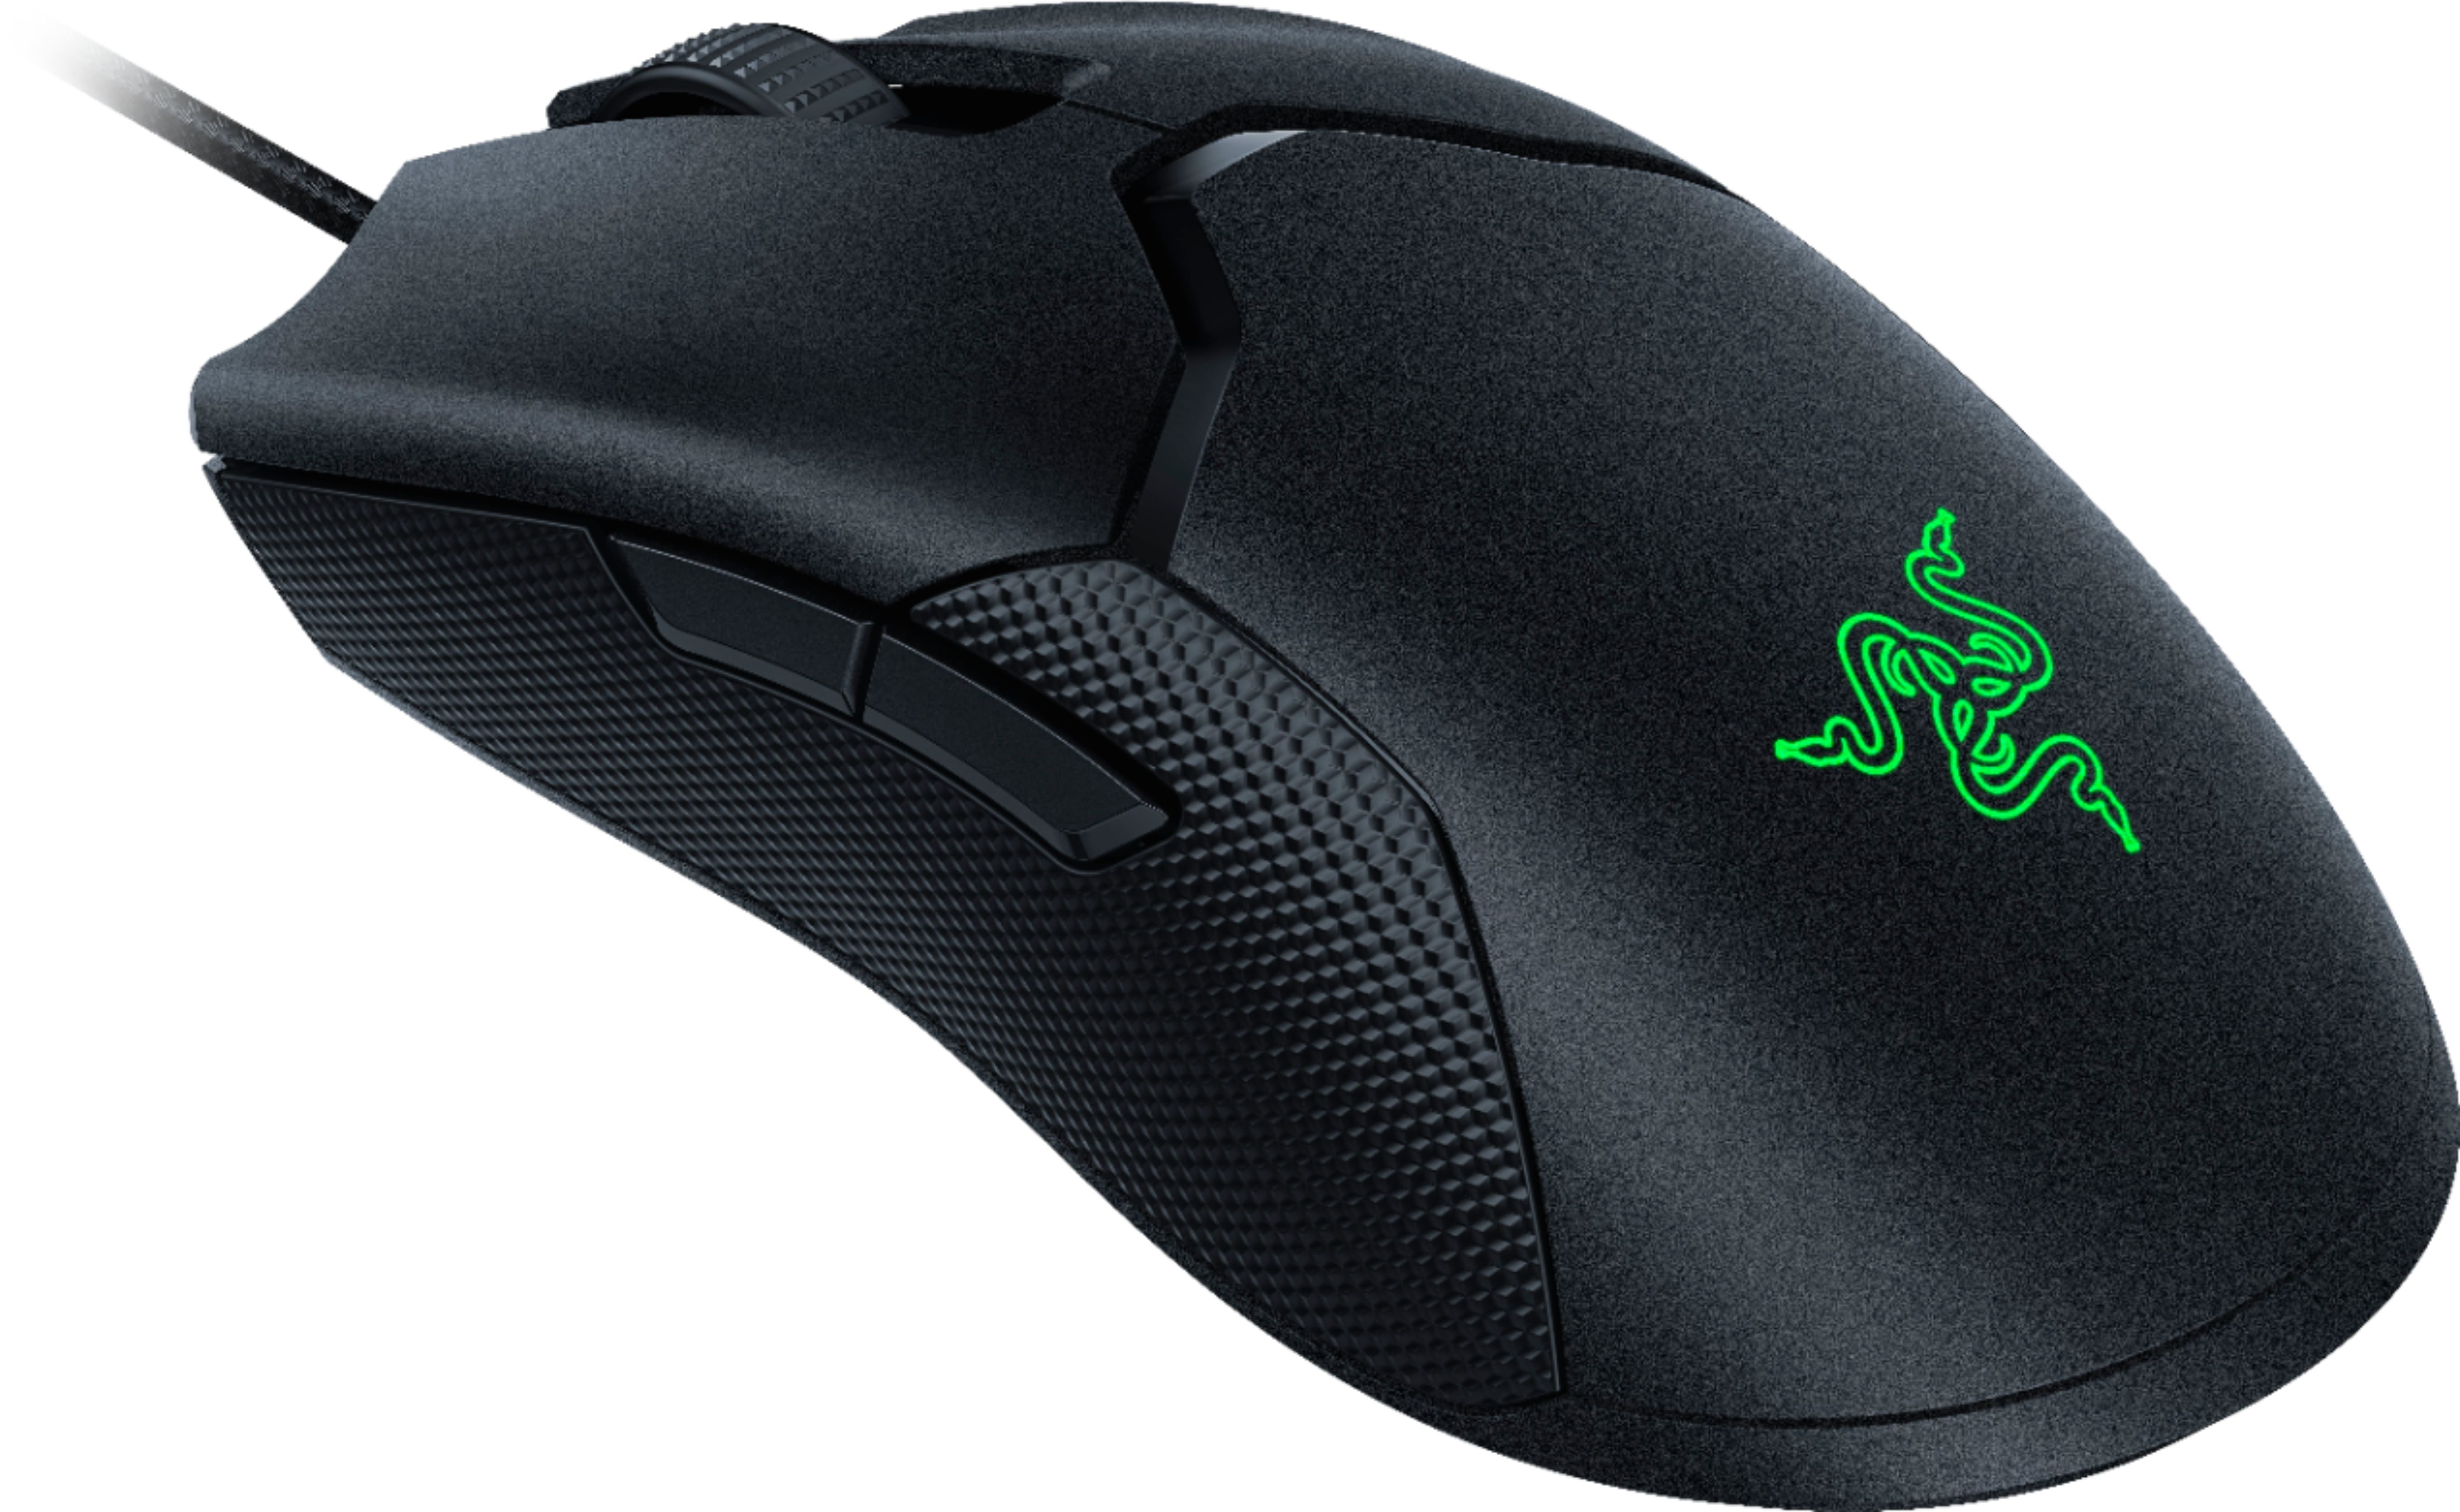 Angle View: Razer - Viper 8KHz Lightweight Wired Optical Gaming Ambidextrous Mouse with Chroma RGB Lighting - Black